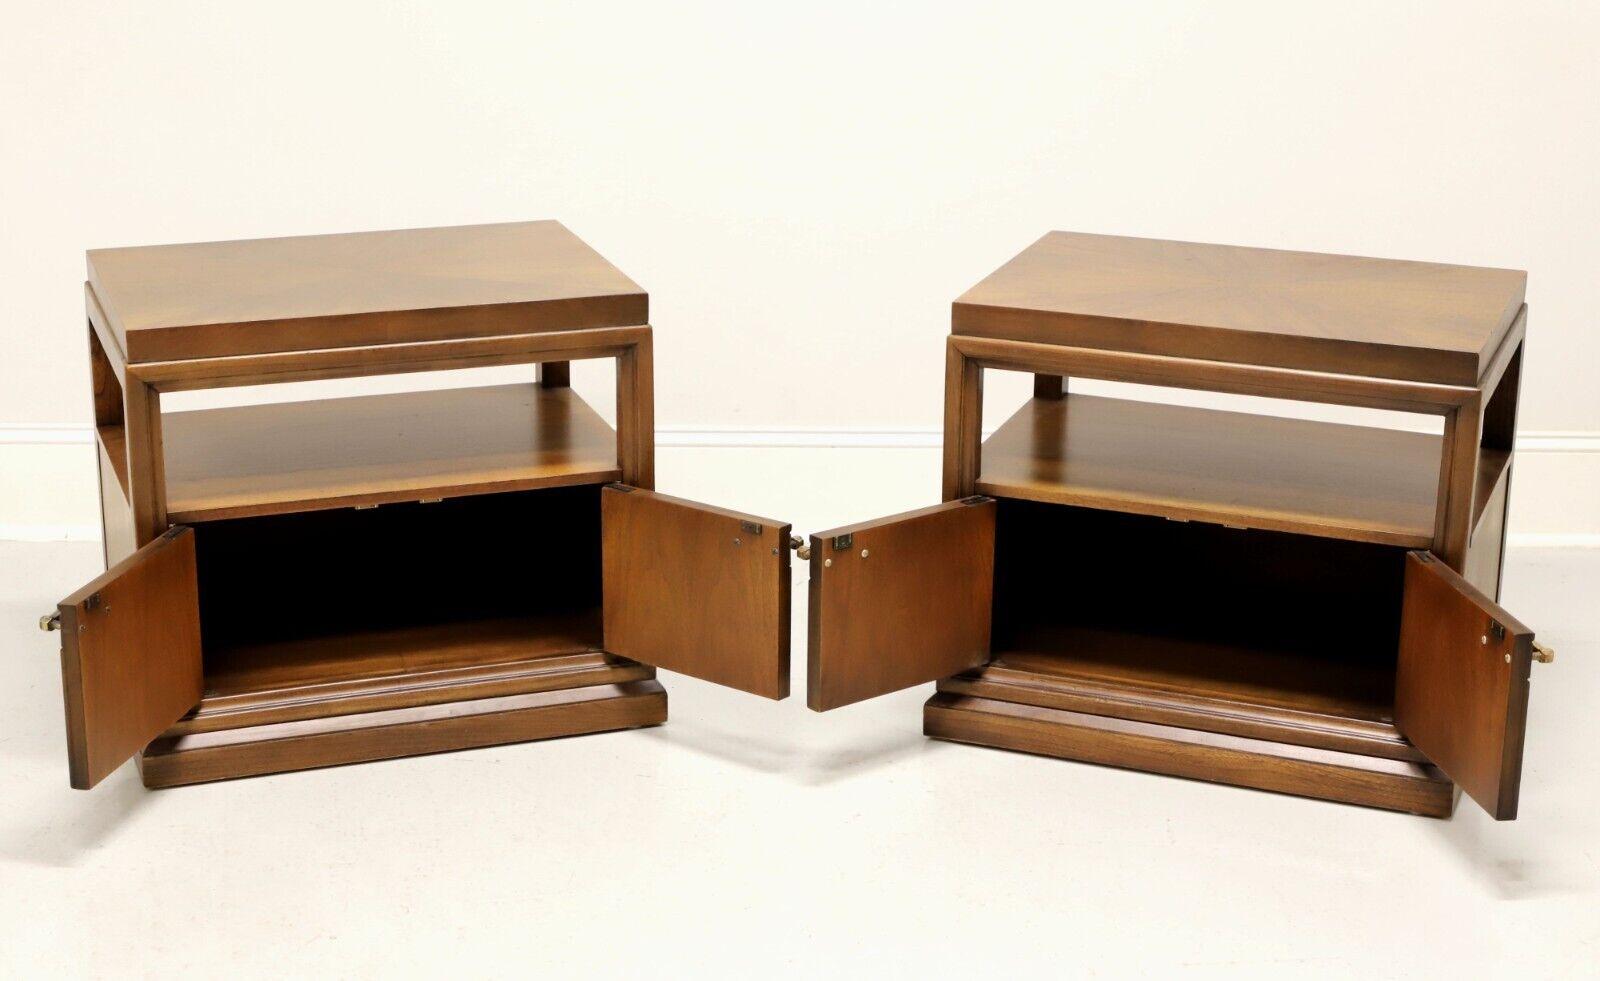 American FANCHER 1960's Walnut Neoclassical Nightstands - Pair For Sale